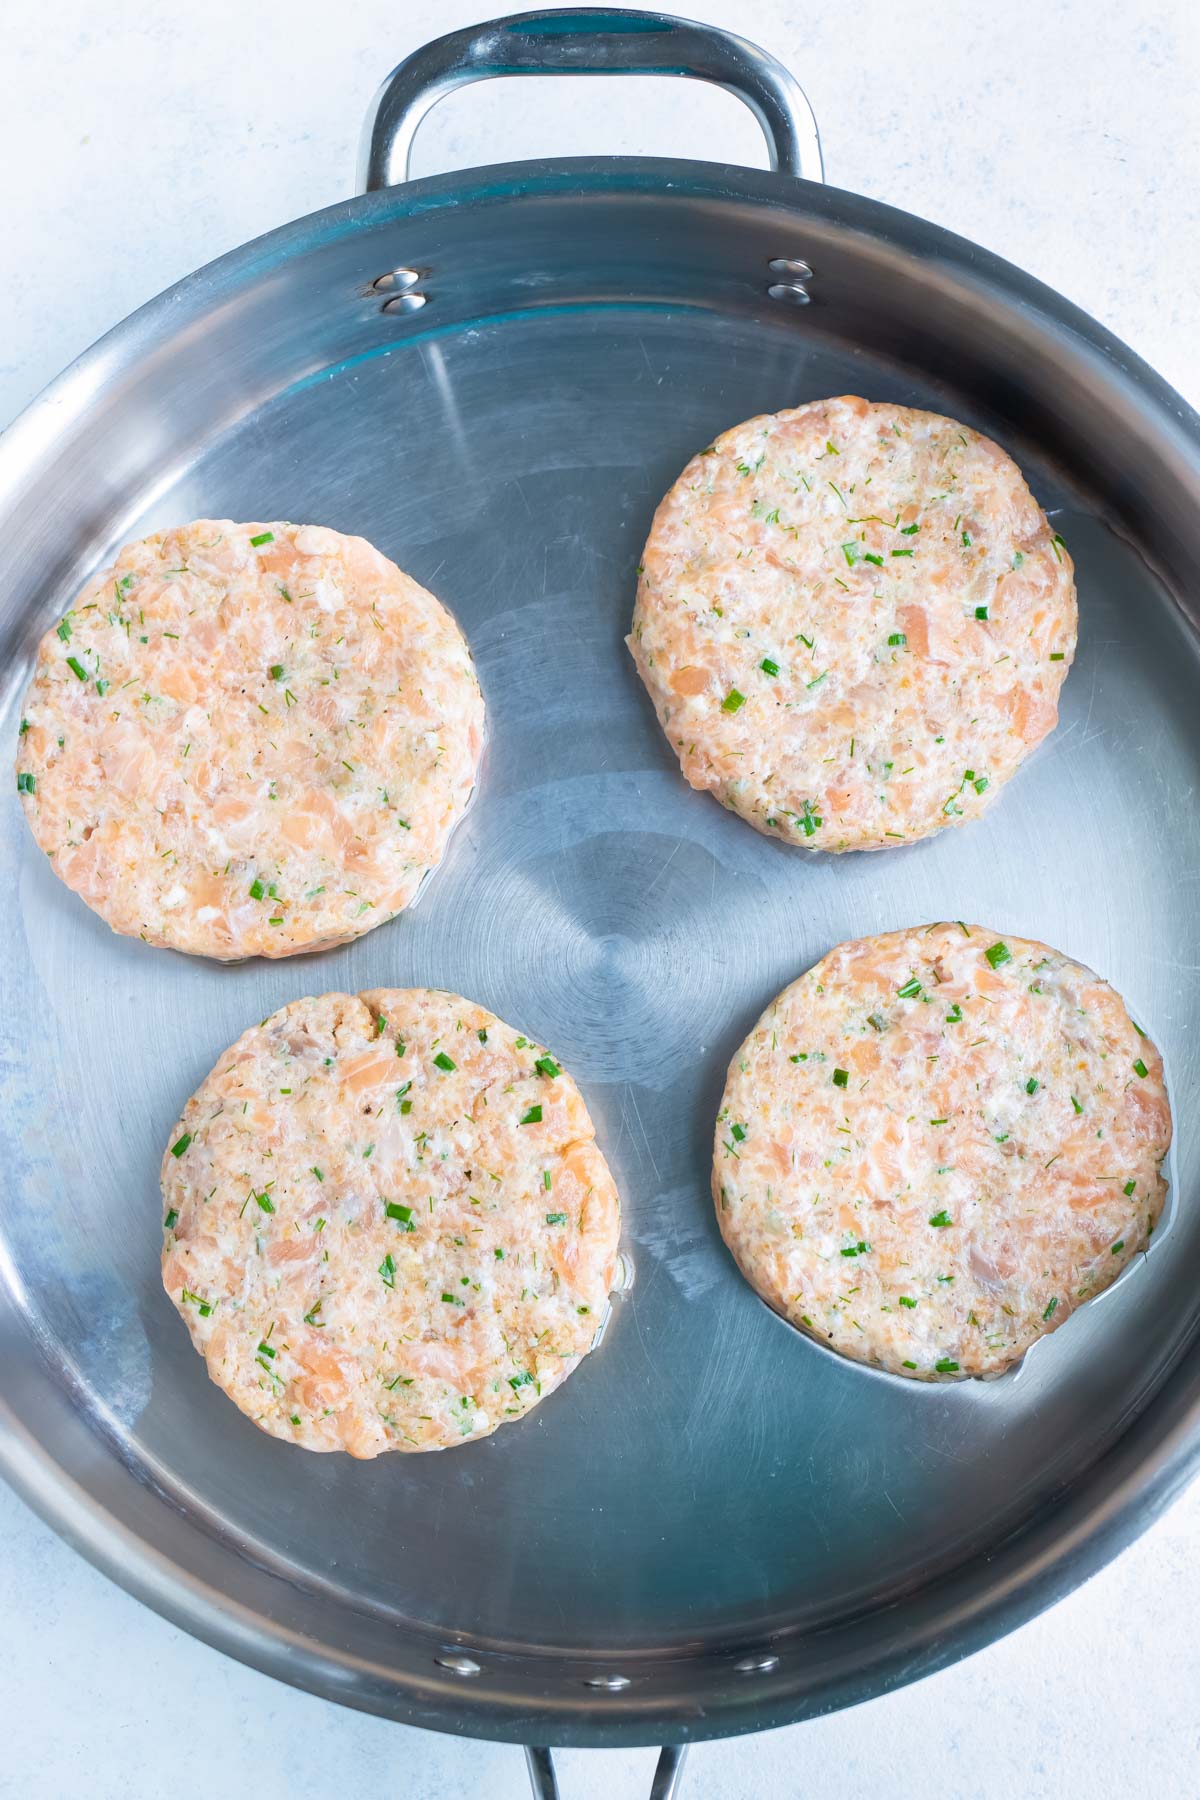 Salmon burgers are cooked in a skillet on the stove.